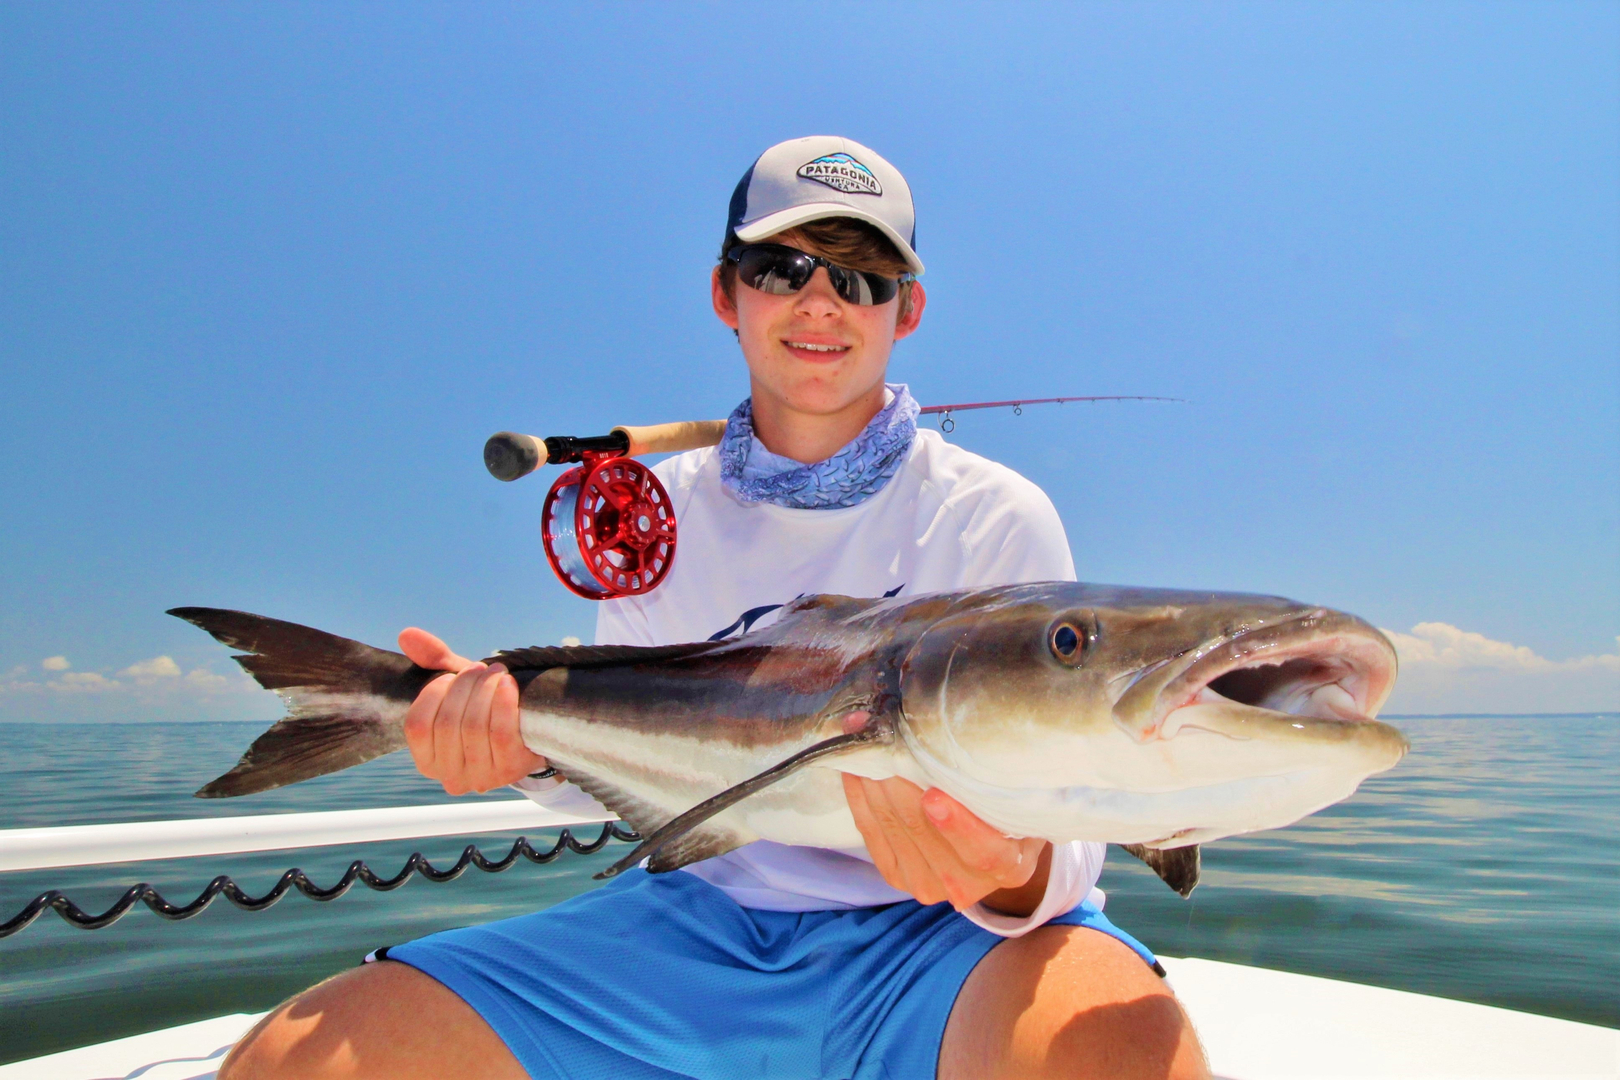 Chesapeake Bay Fly Fishing Guide & Light Tackle Fishing Charters in Virginia